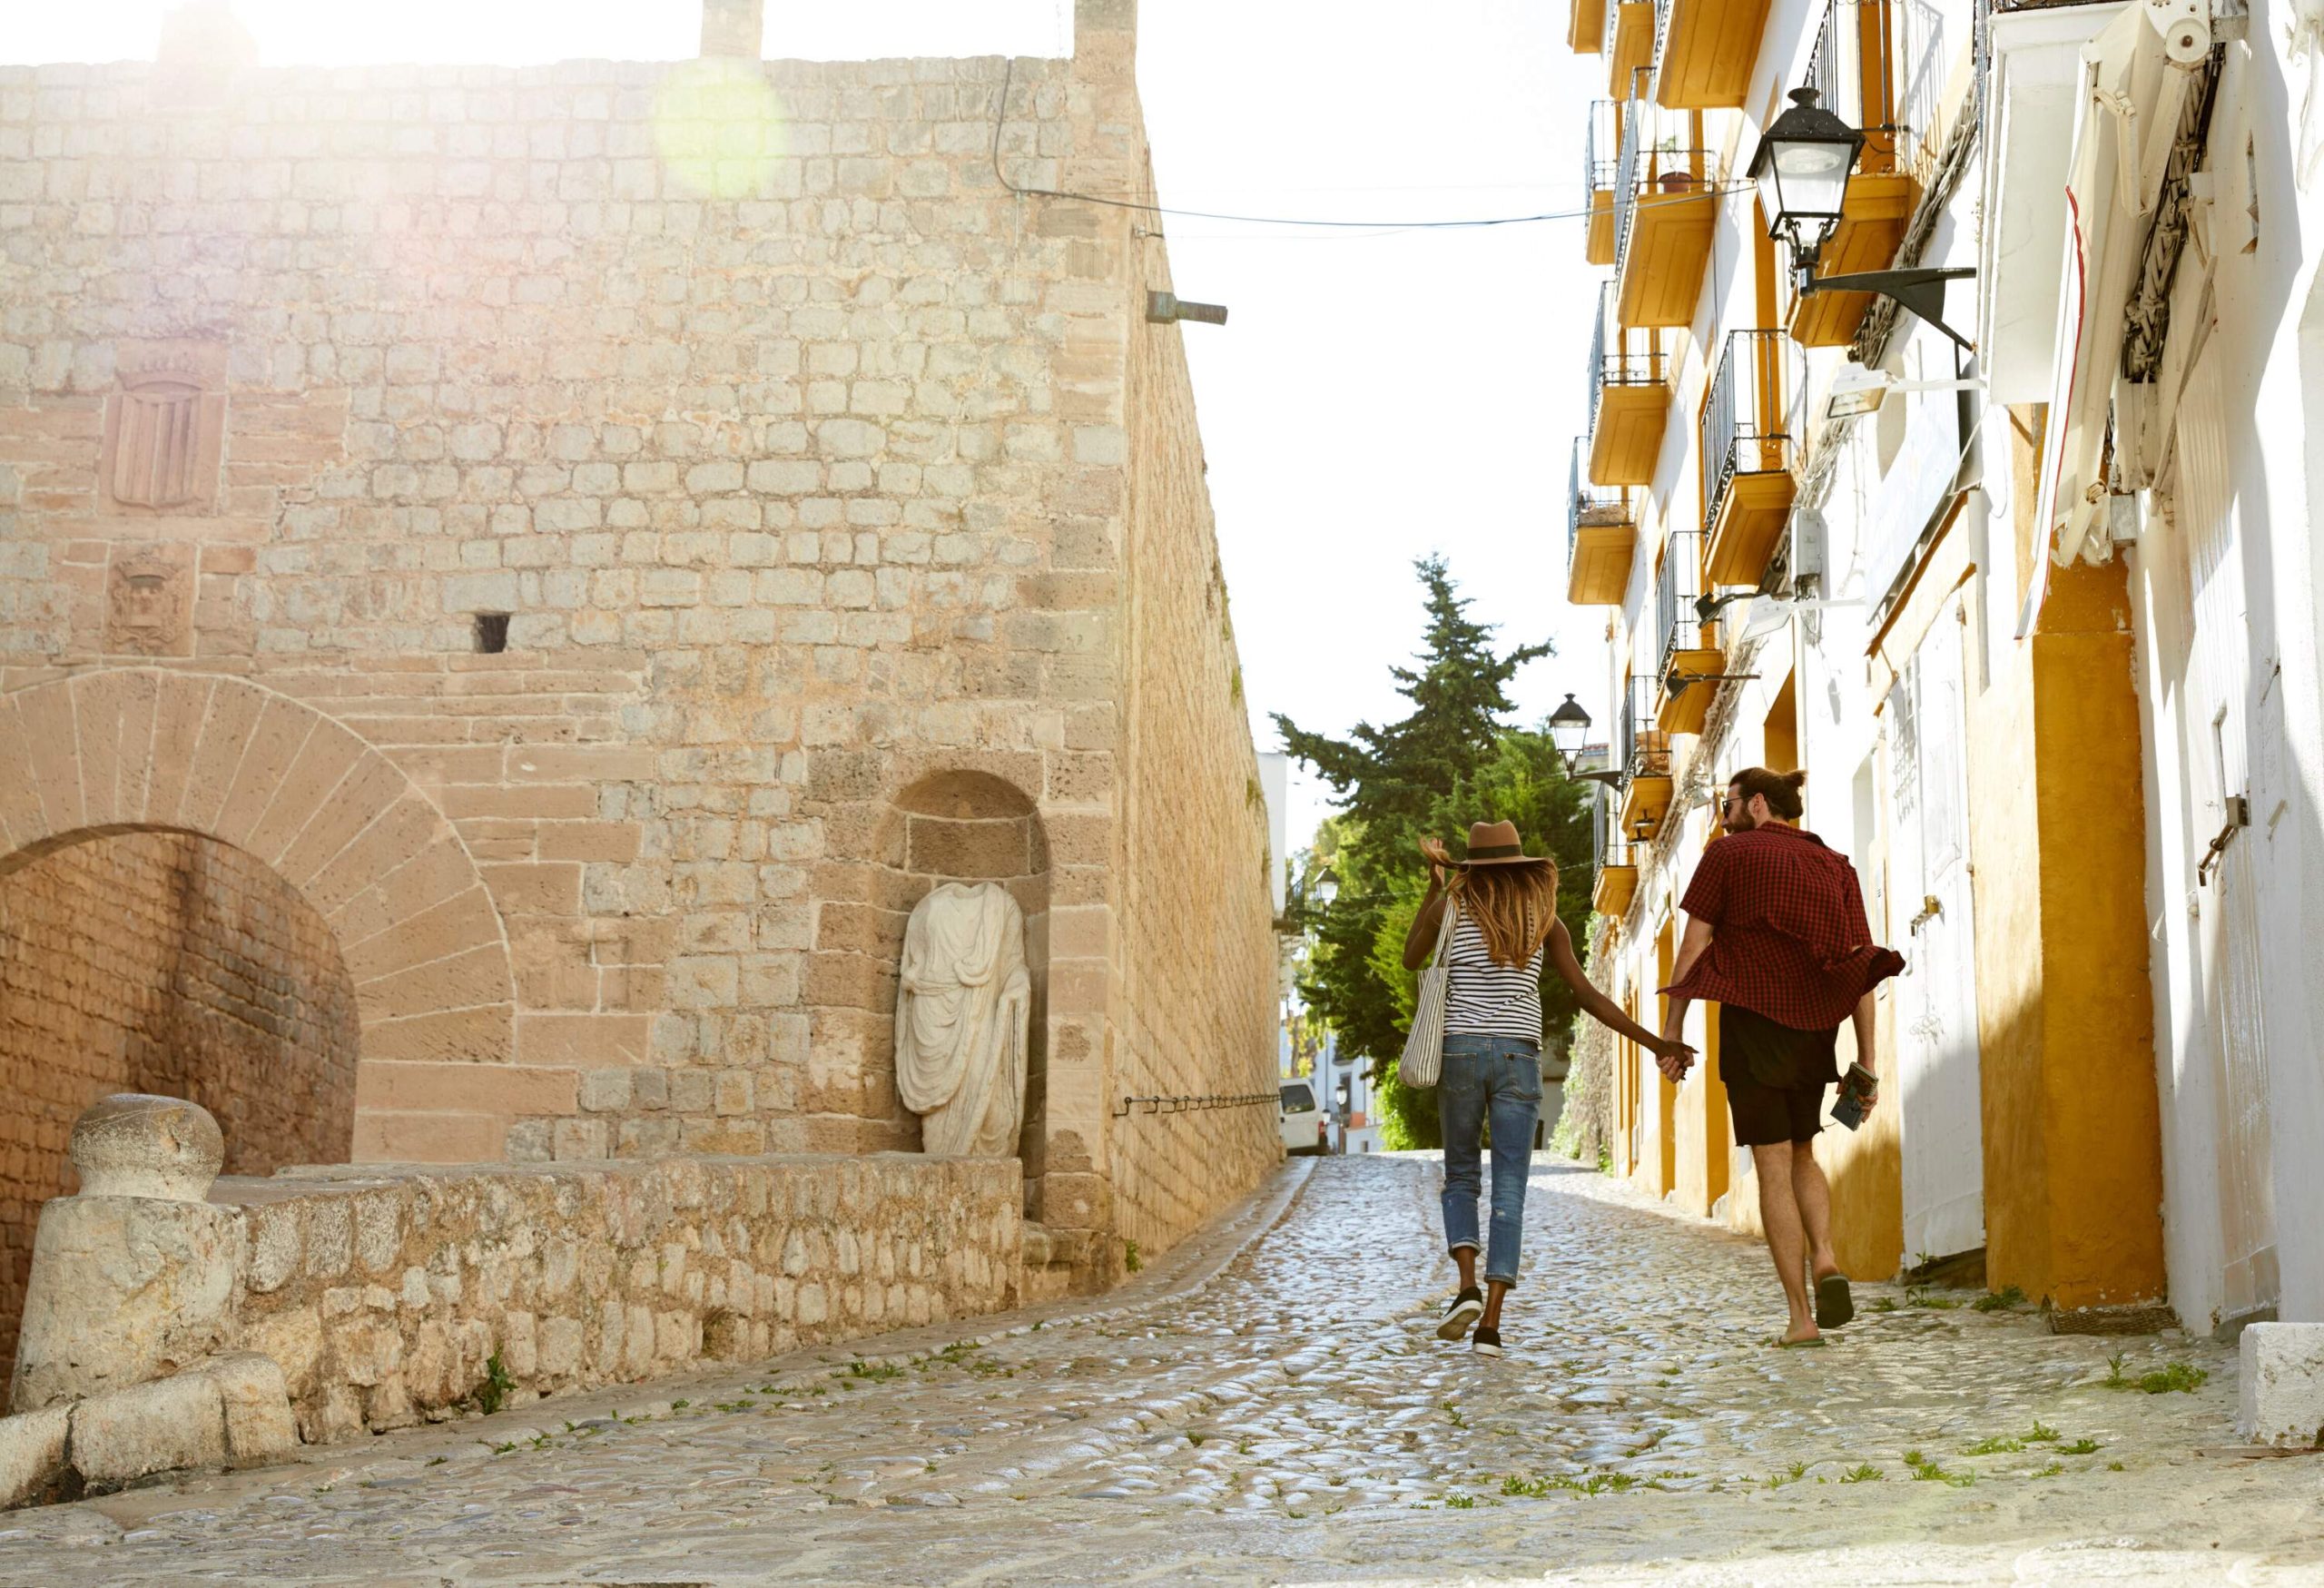 A couple in casual clothes walks on a cobblestone street between the neighbourhood buildings.